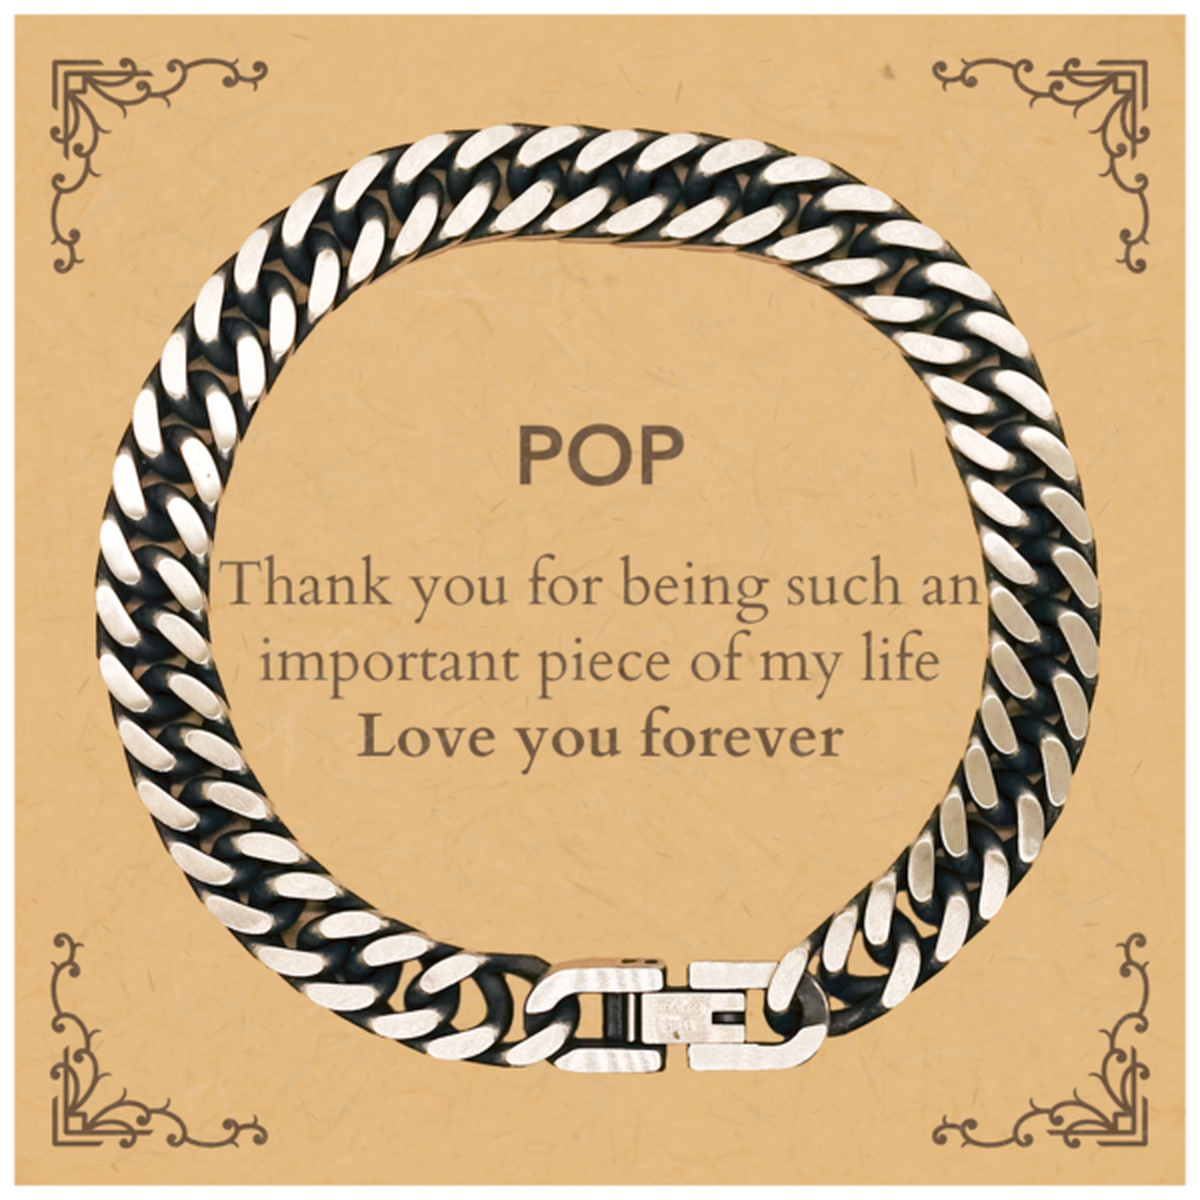 Appropriate Pop Cuban Link Chain Bracelet Epic Birthday Gifts for Pop Thank you for being such an important piece of my life Pop Christmas Mothers Fathers Day